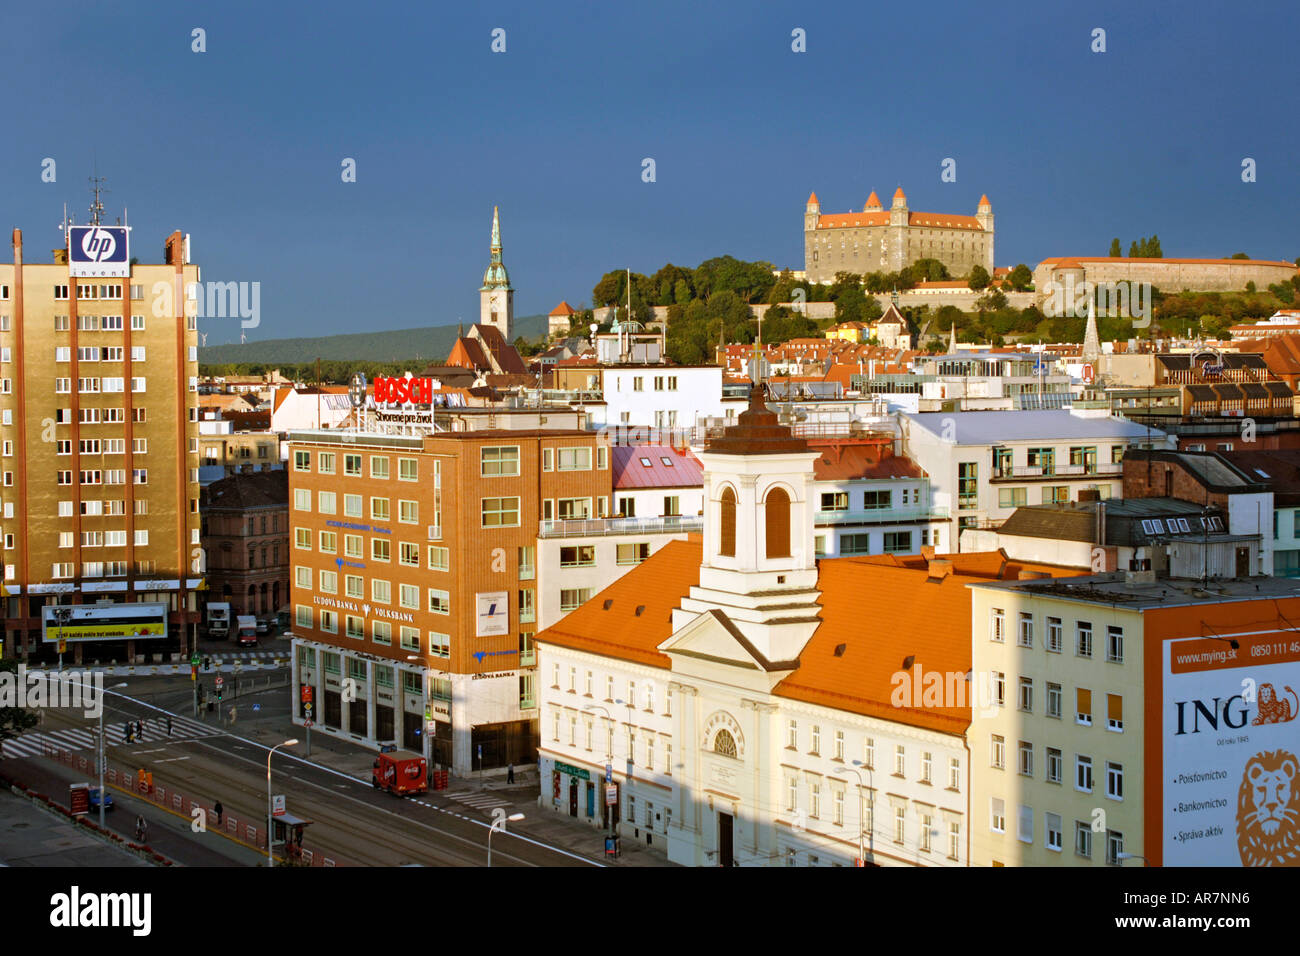 Dawn view across Bratislava, the capital of Slovakia, showing Bratislava castle and rooftops in the CBD. Stock Photo